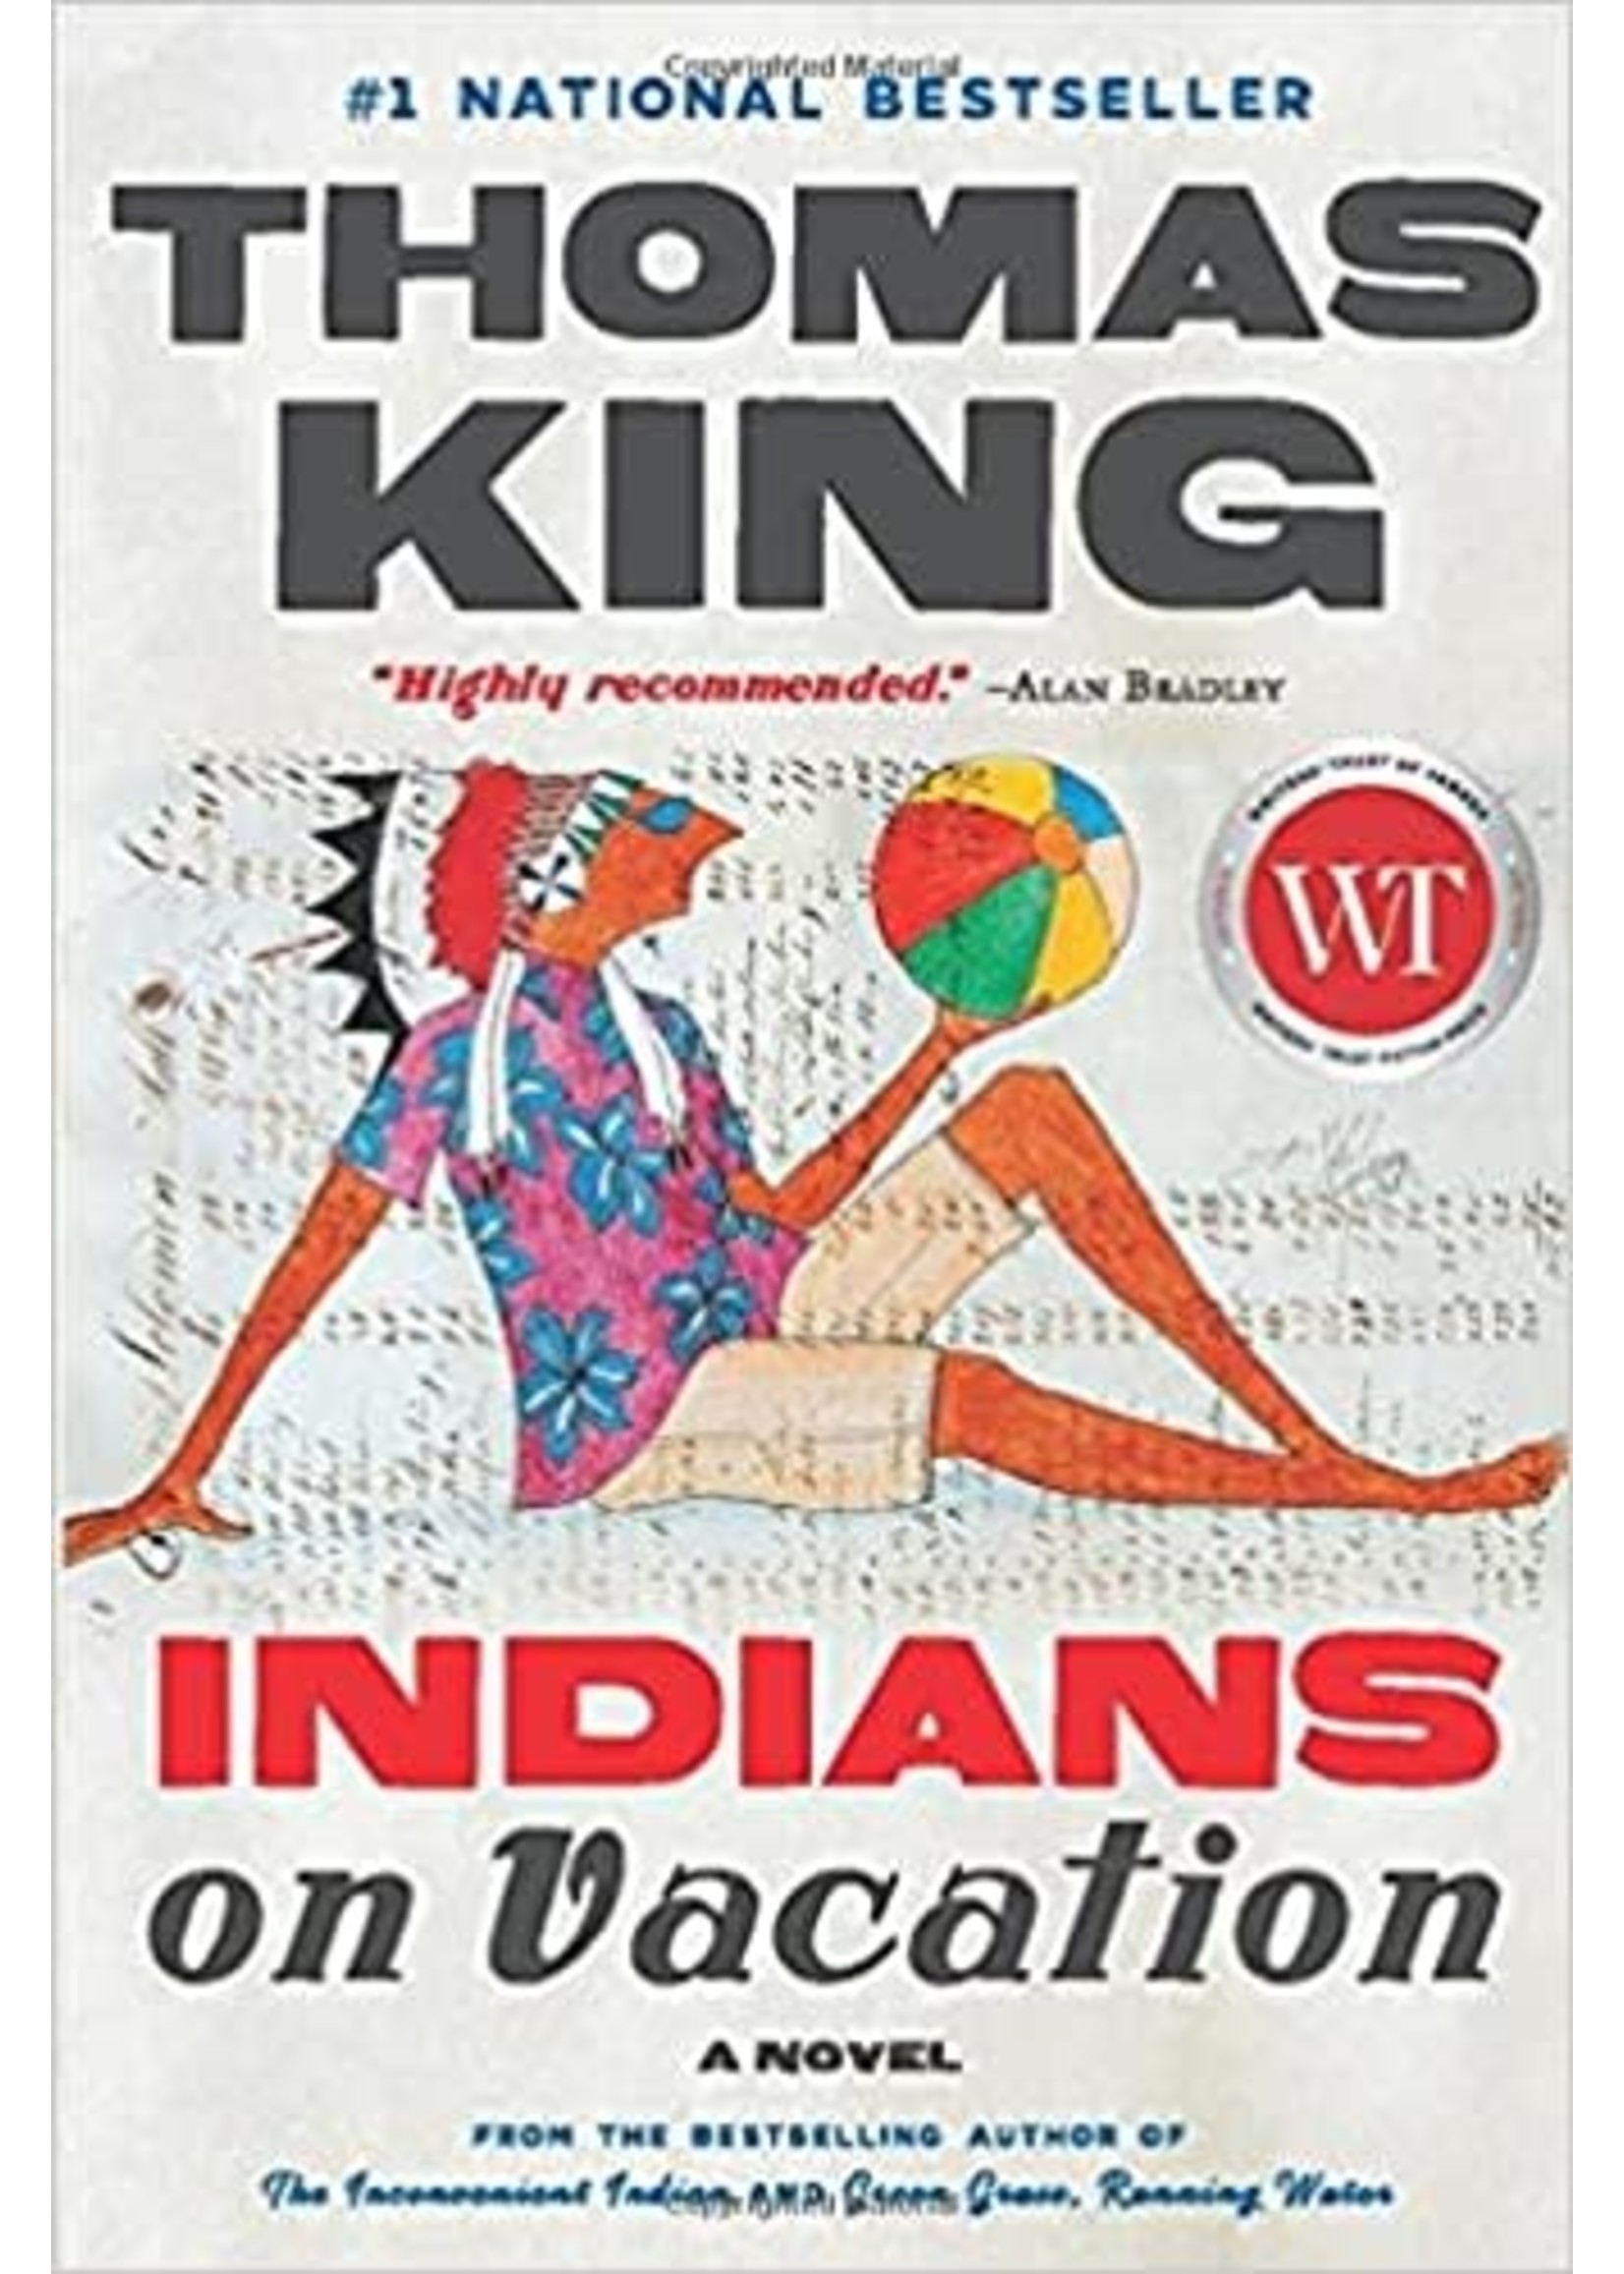 Indians on Vacation by Thomas King